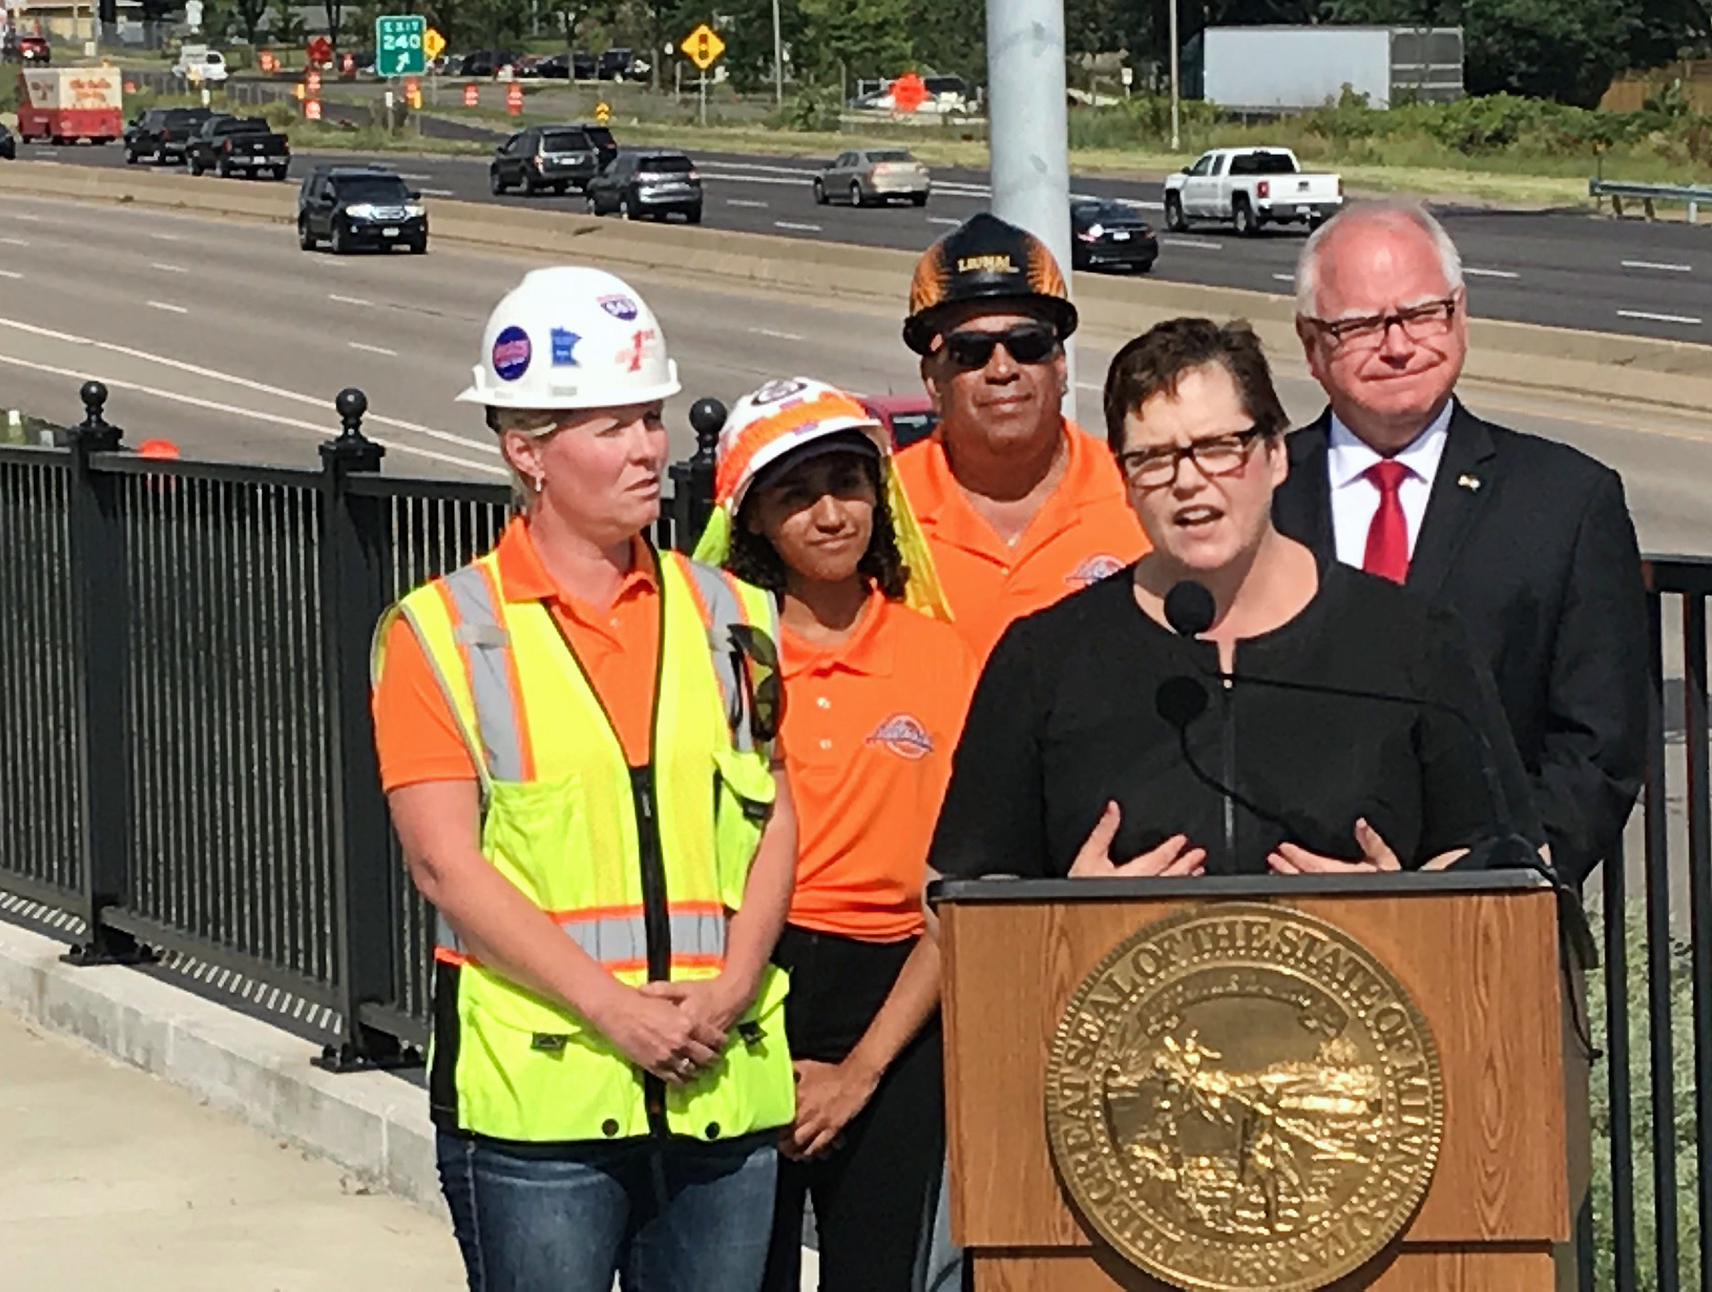 Commissioner maragaret anne kelliher speaking at a podium. Gov. tim walz is to her left, three other people are two her right, and a busy section of freeway is behind her.